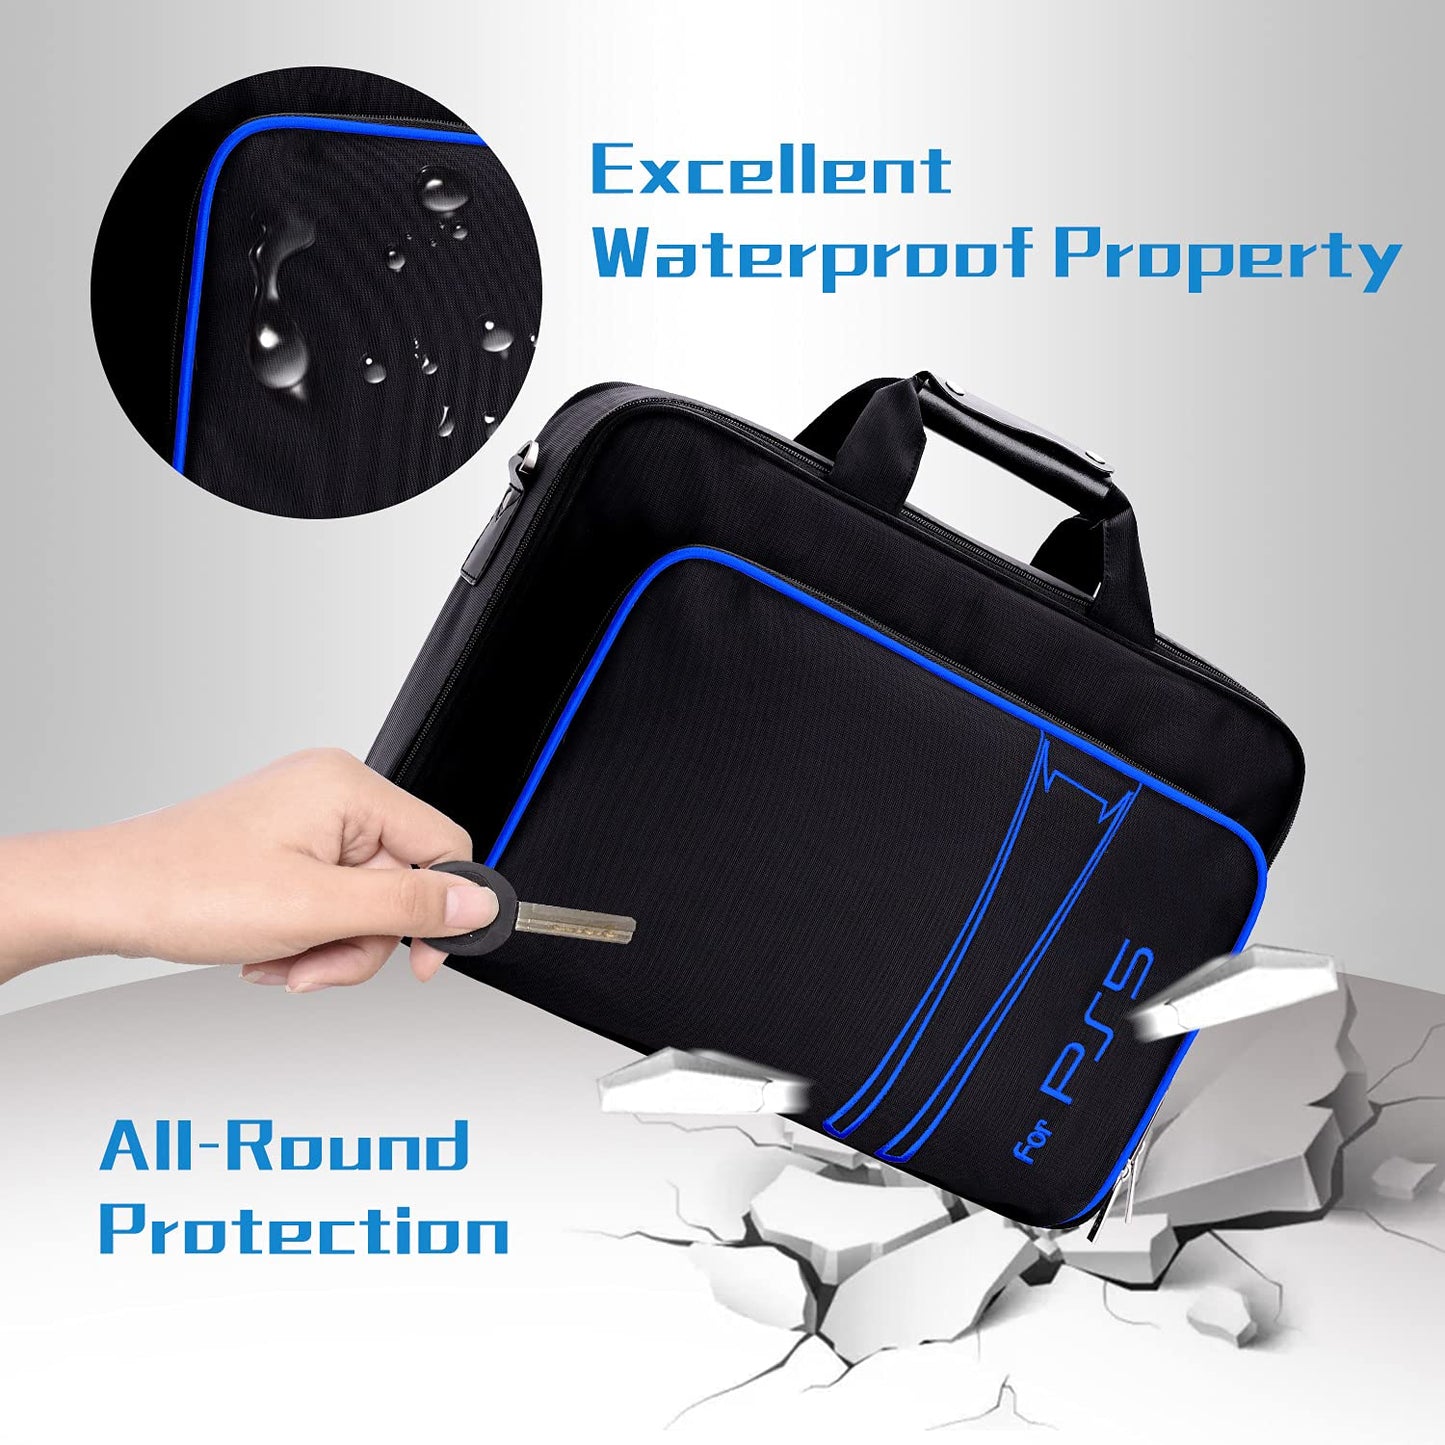 G-STORY PS5 Case, Carrying Case Travel Bag for PS5, Storage Bag Compatible PS5